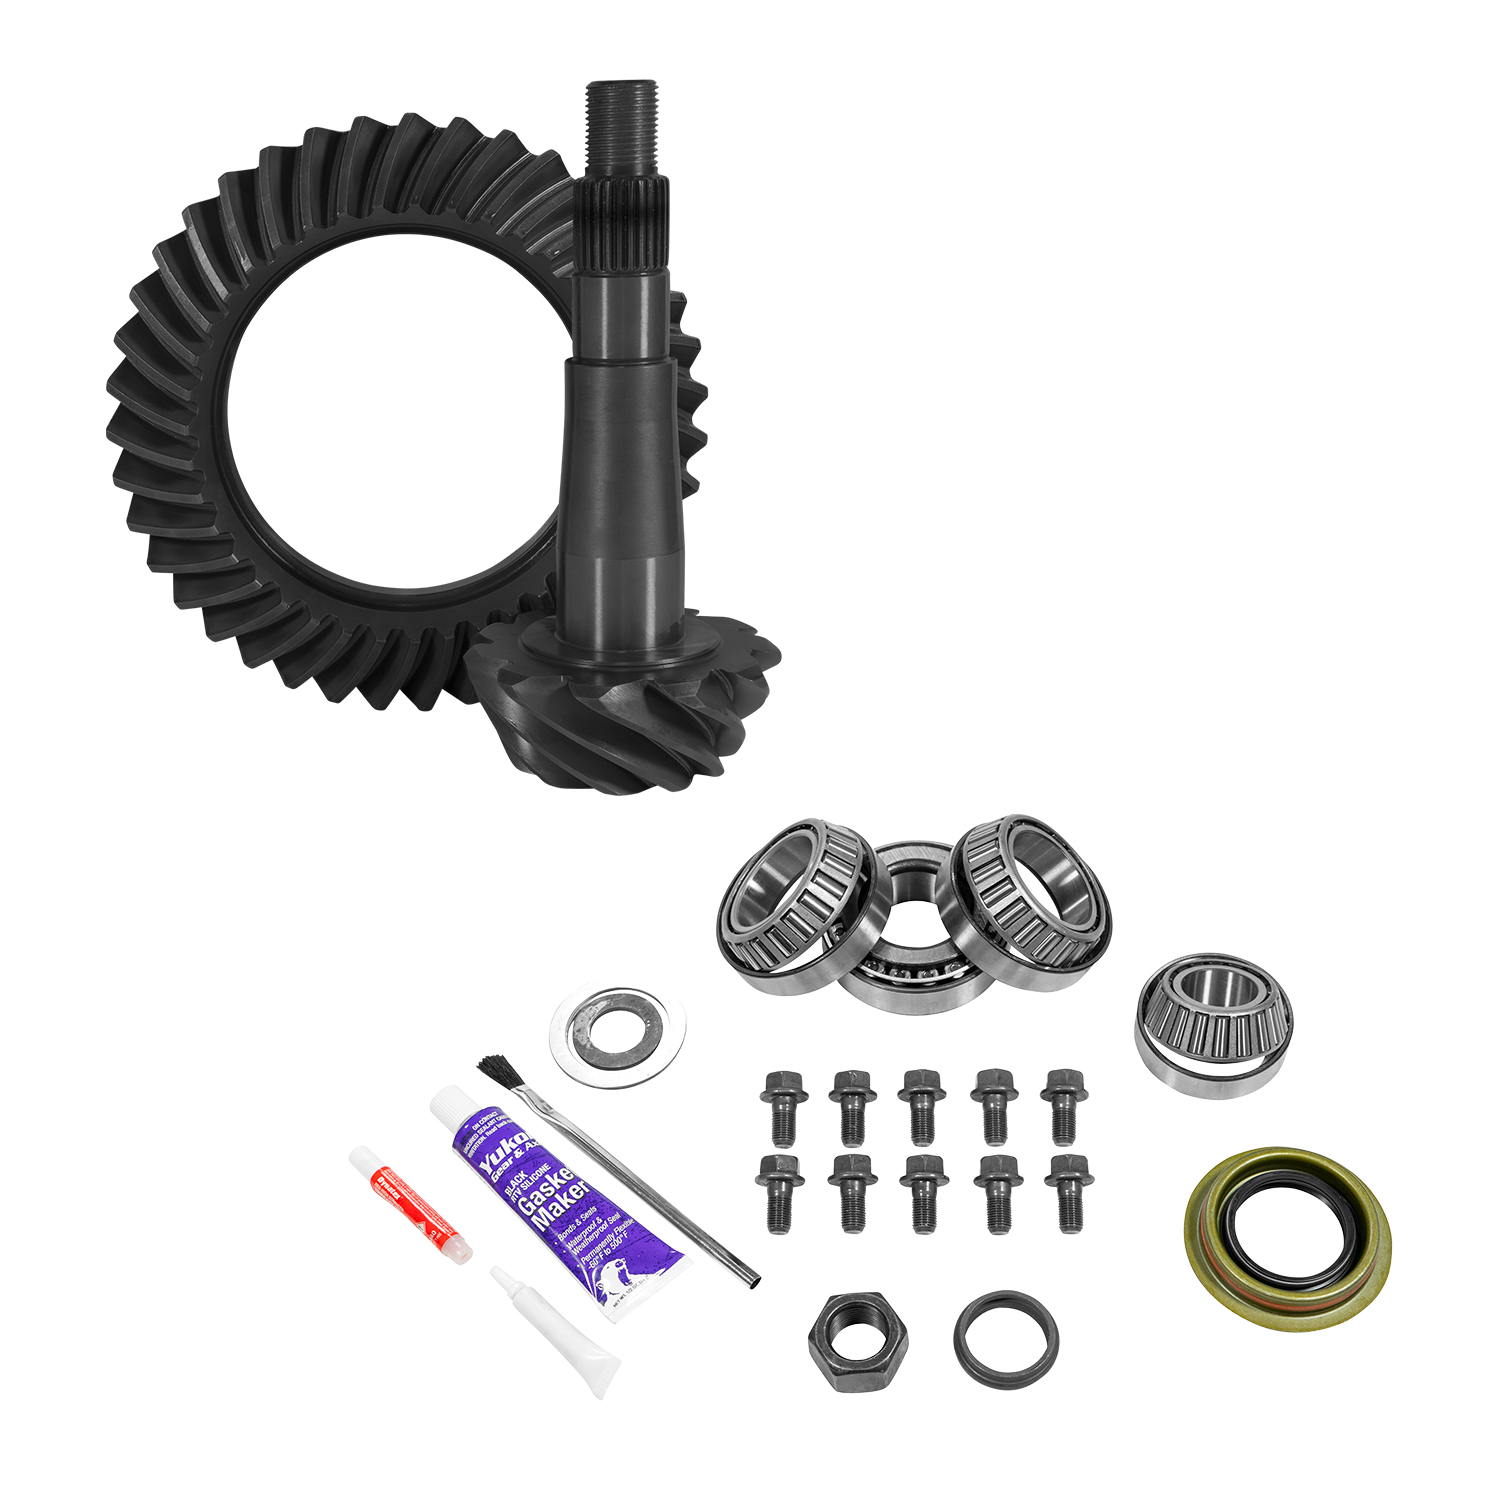 USA Standard 10912 8.25 in./ 213Mm Chy 3.07 Rear Ring & Pinion And Install Kit